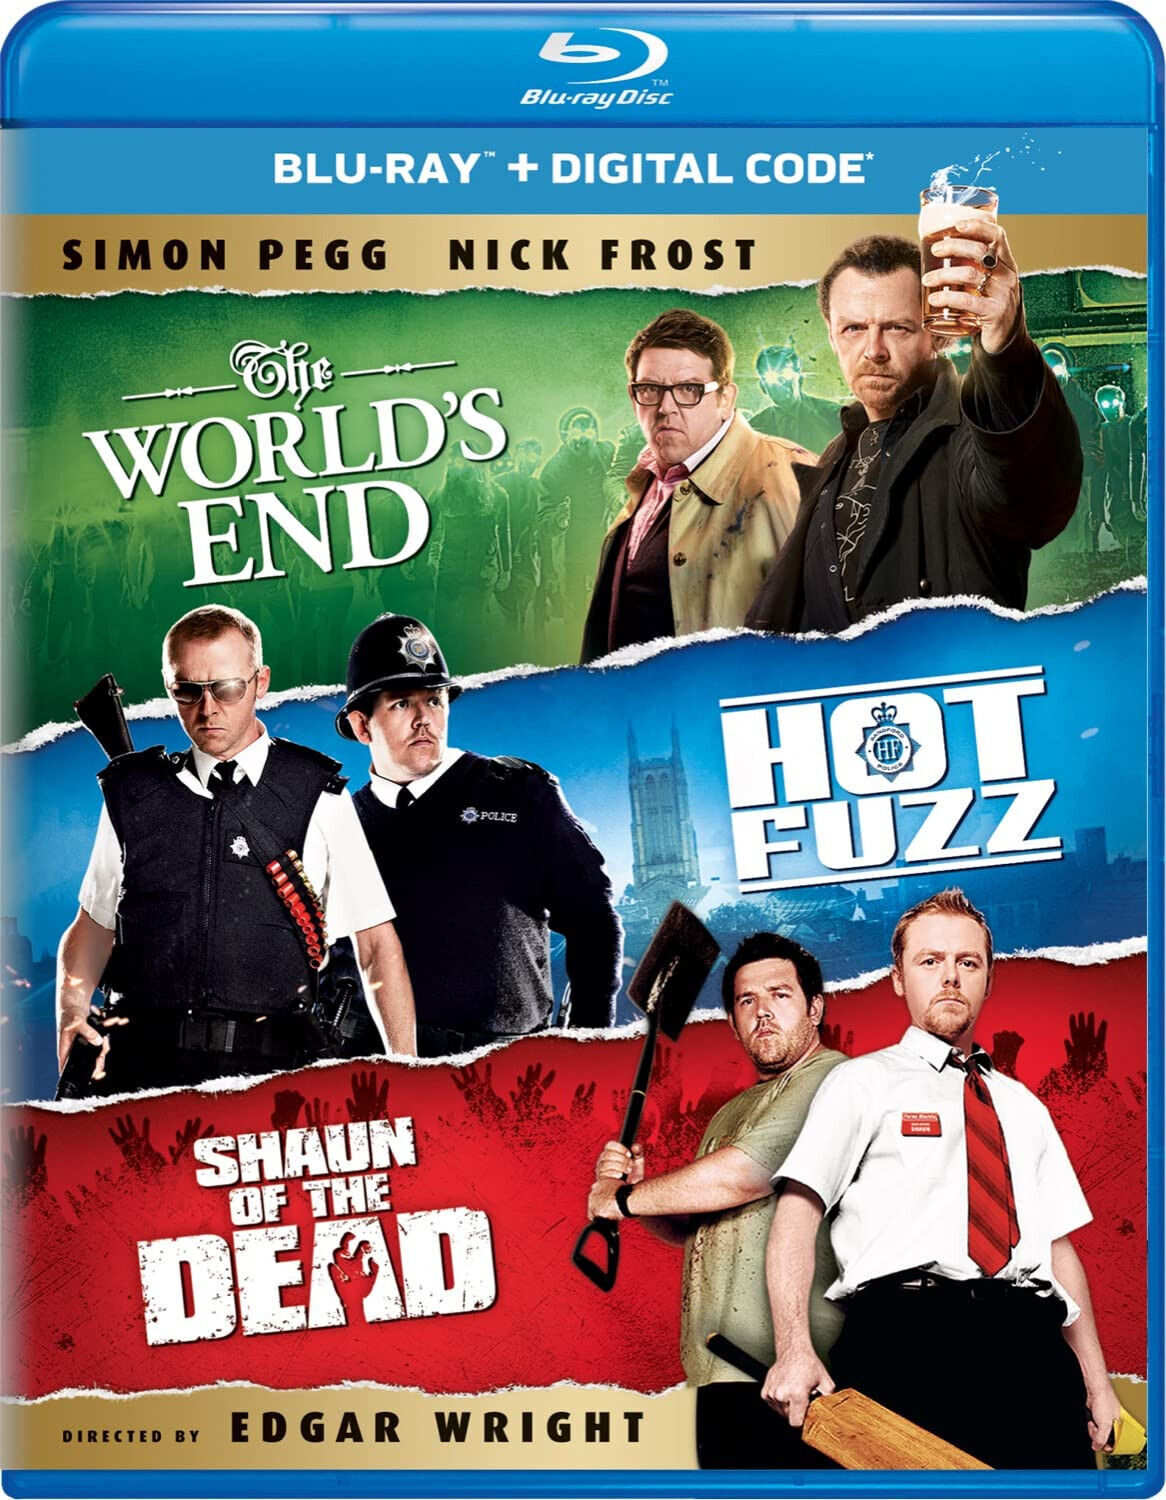 Shaun of the Dead / Hot Fuzz / The World's End Trilogy [Blu-ray] - 3 Discs - $19.50